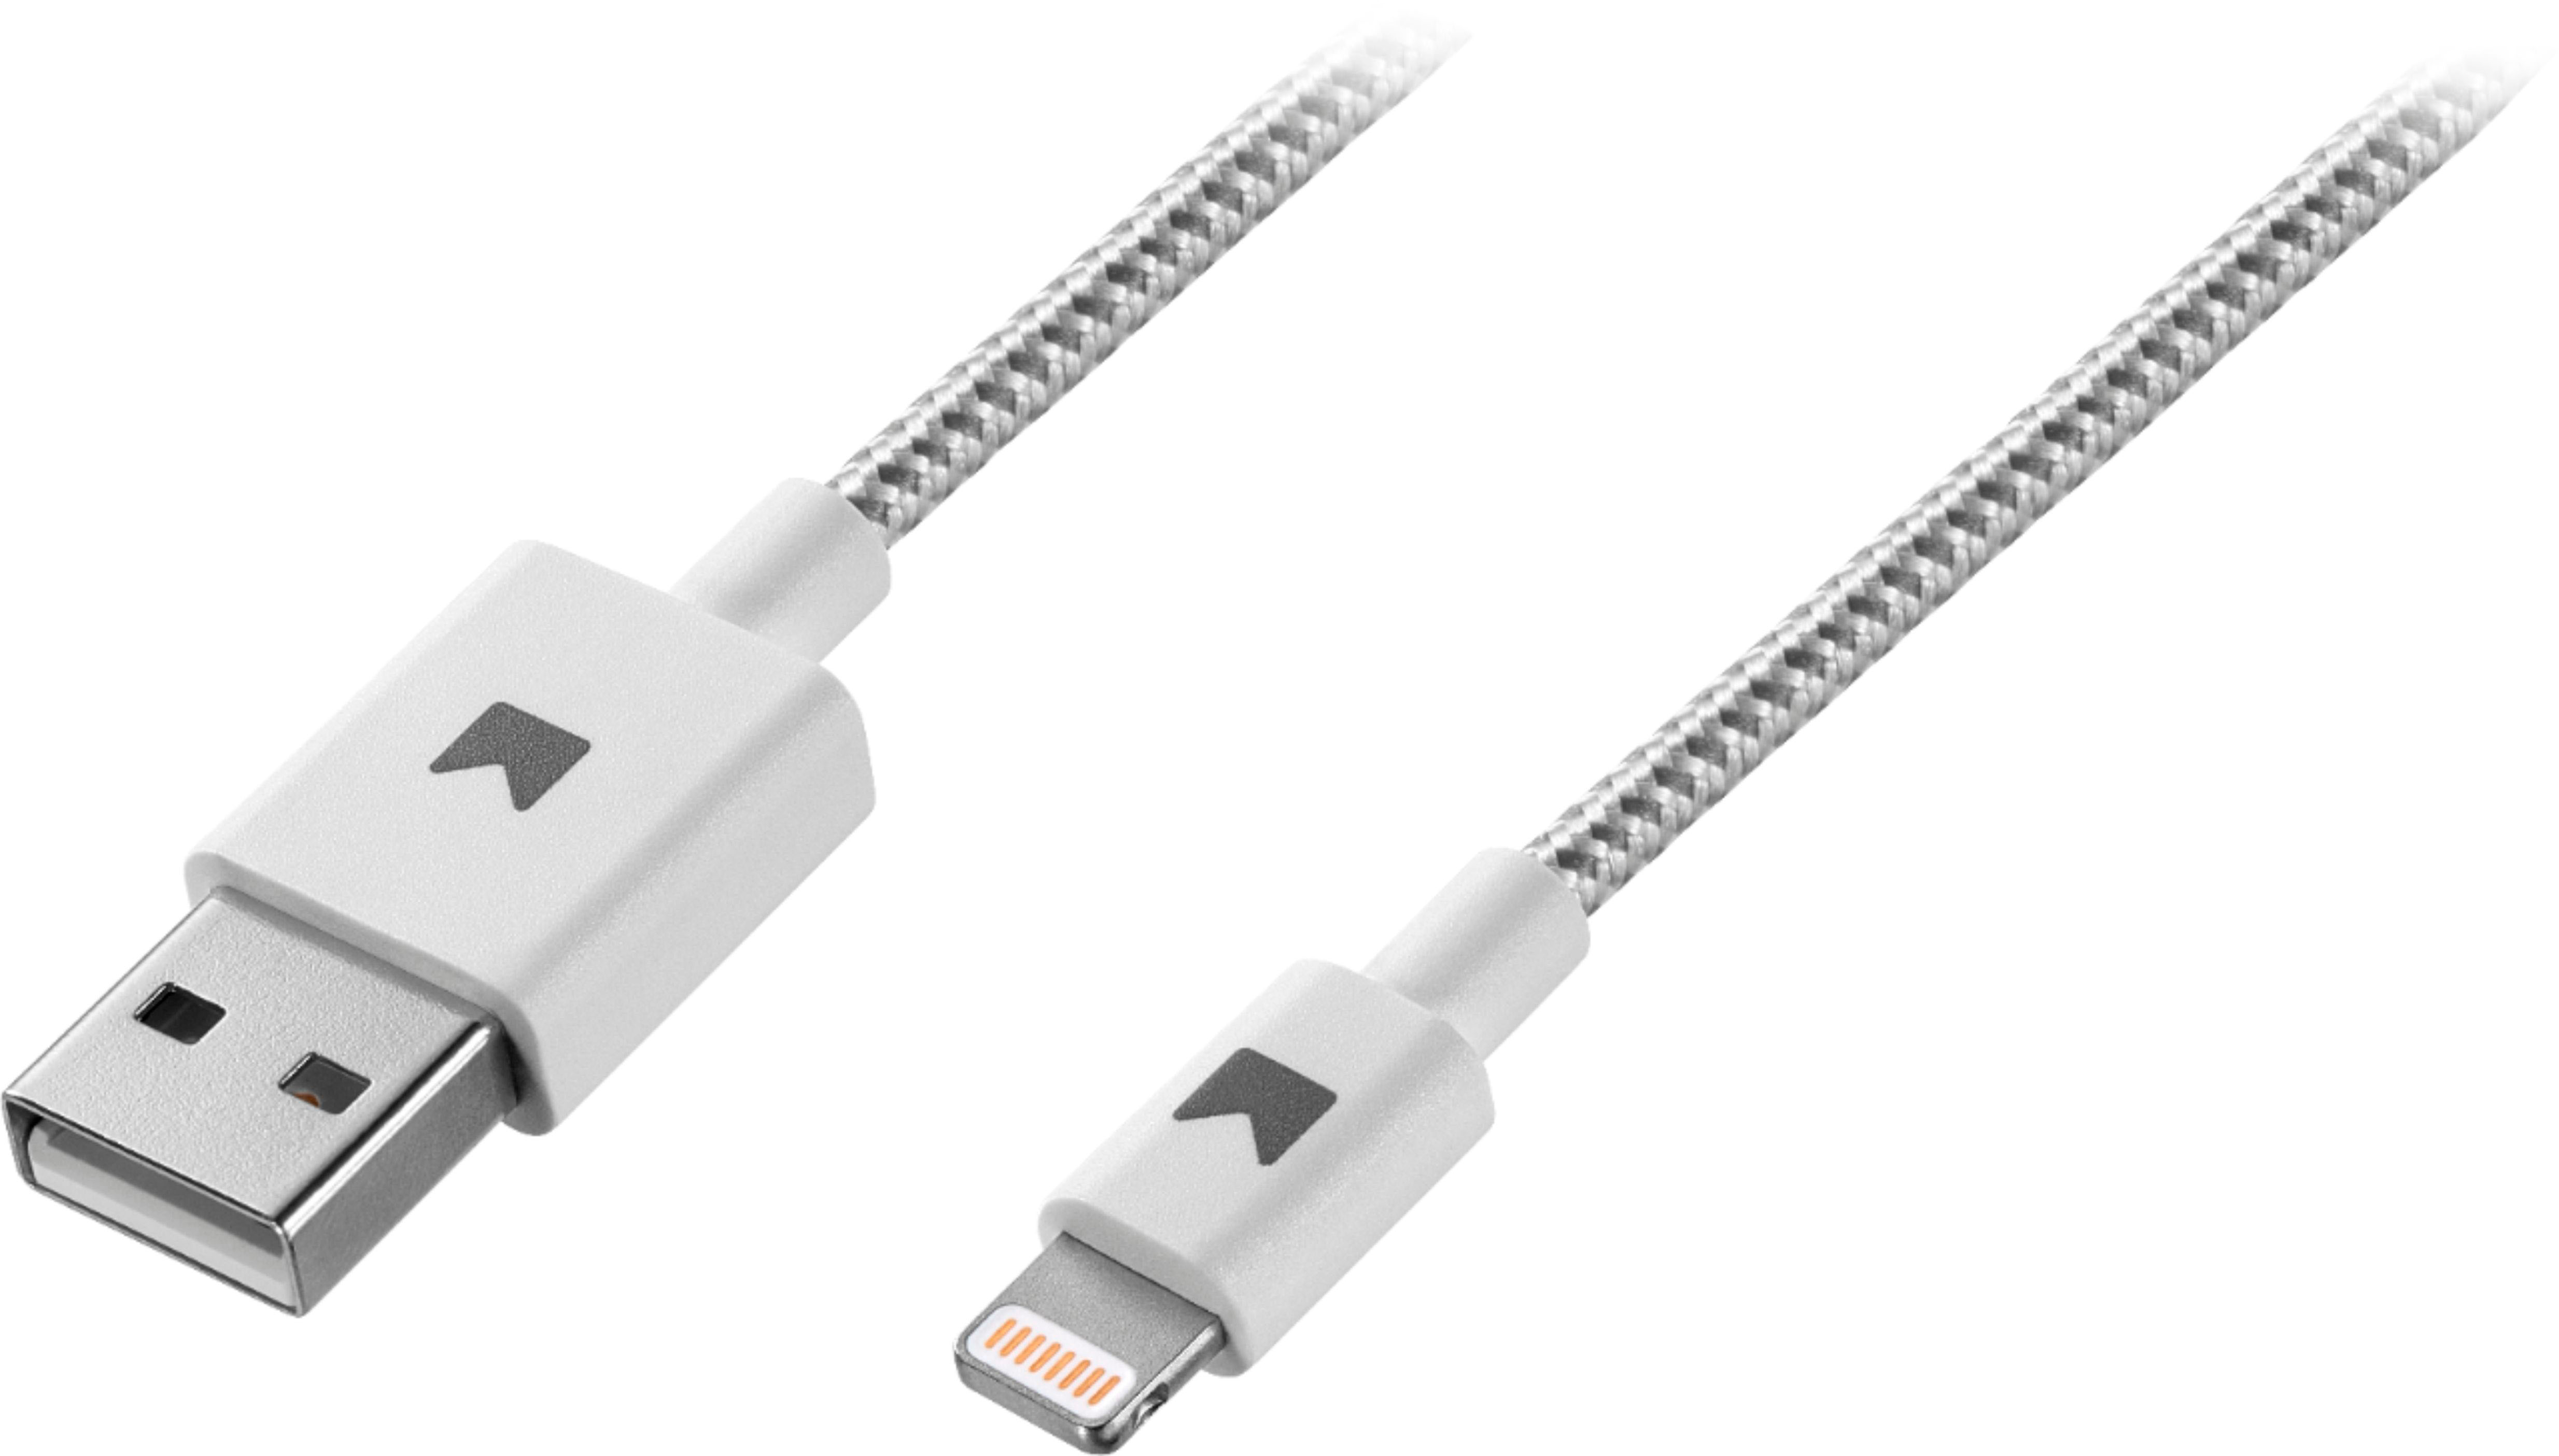 FOX USB 3.3 Type-C Lightning Cable 220 Volts Fast Charging Cord for iPhone  / iPod / iPad - White 